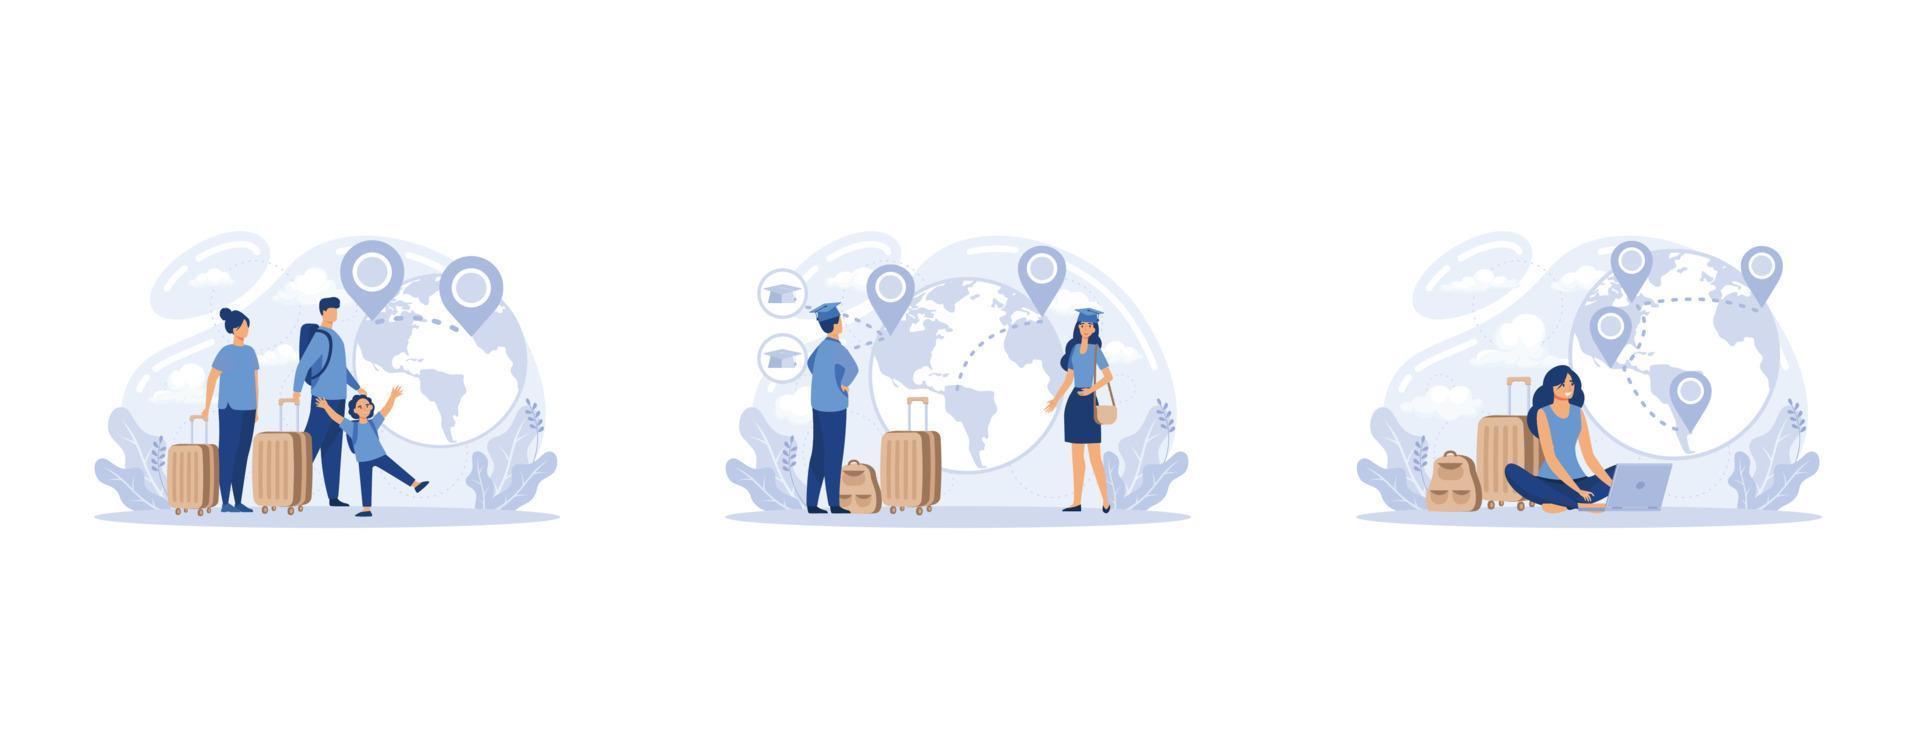 Human capital, International migration, brain drain, digital nomad, trained workers, buisness start up, leave country, set flat vector modern illustration